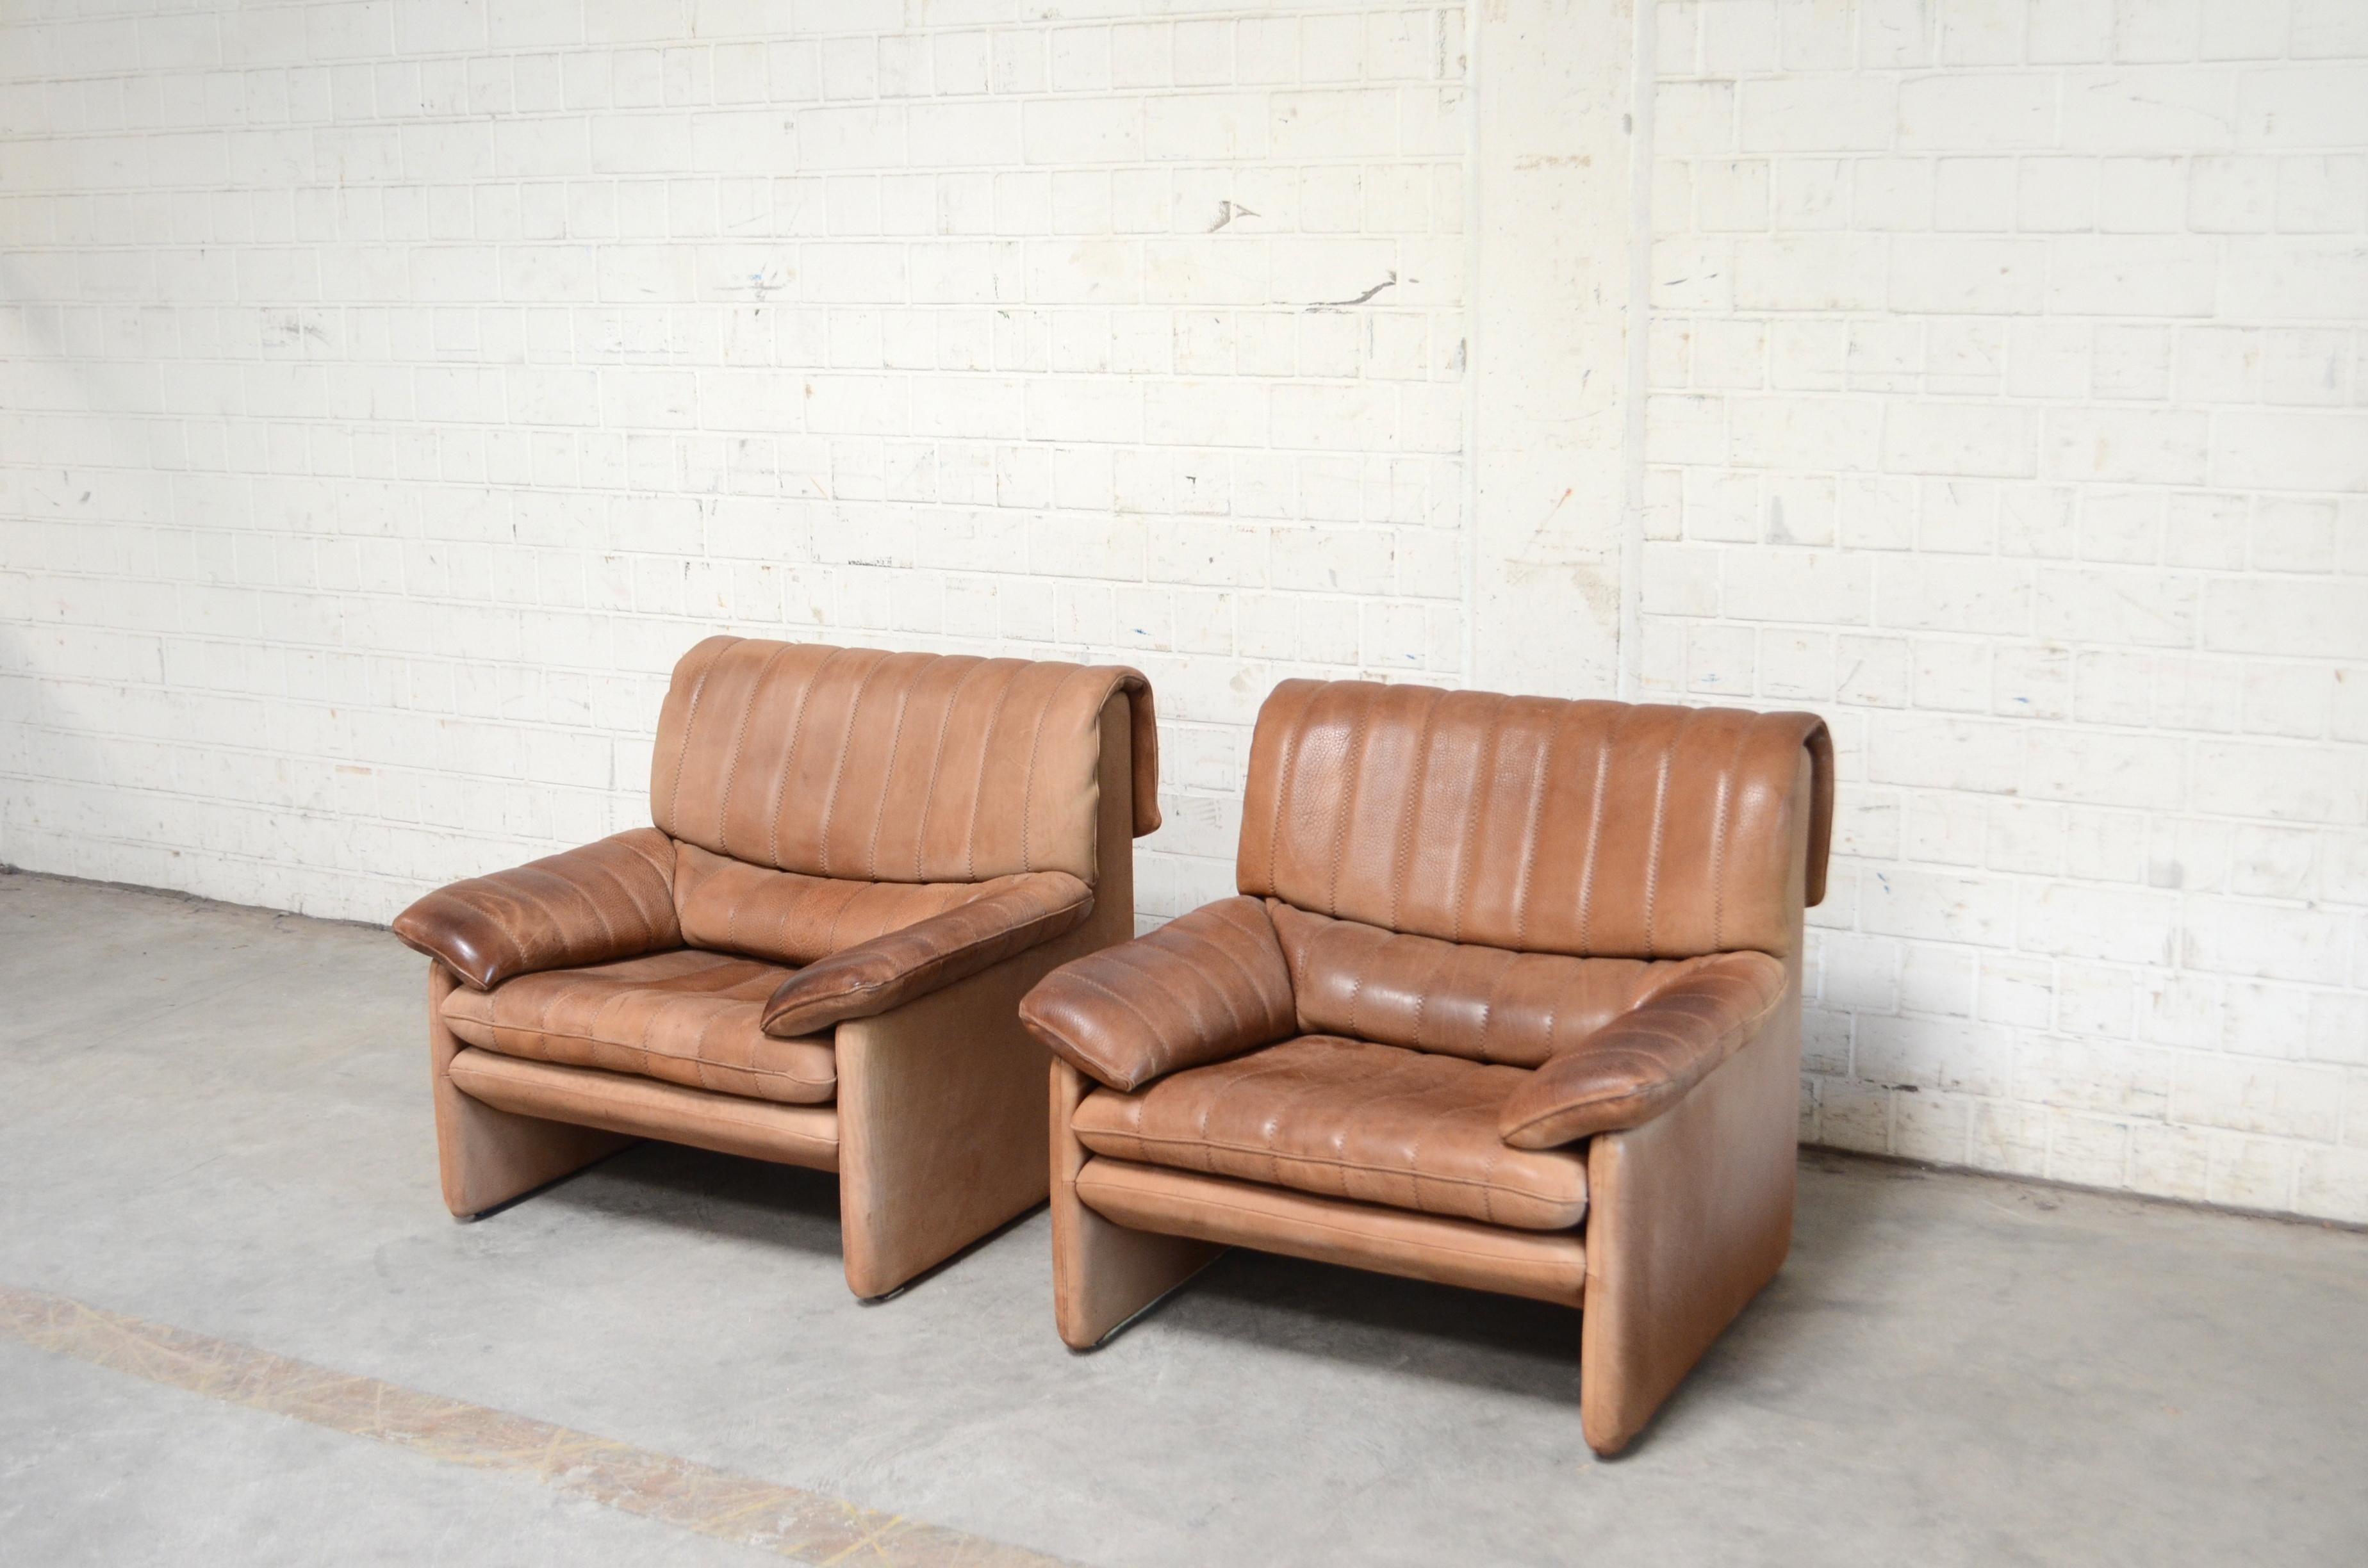 Vintage leather armchair by De Sede. Set of 2
Model Ds 86.
Thick neck leather with bright nature brown color.
Great comfort.
With patina on the armrests.
De Sede is a Switzerland furniture company that creates leather furniture with premium